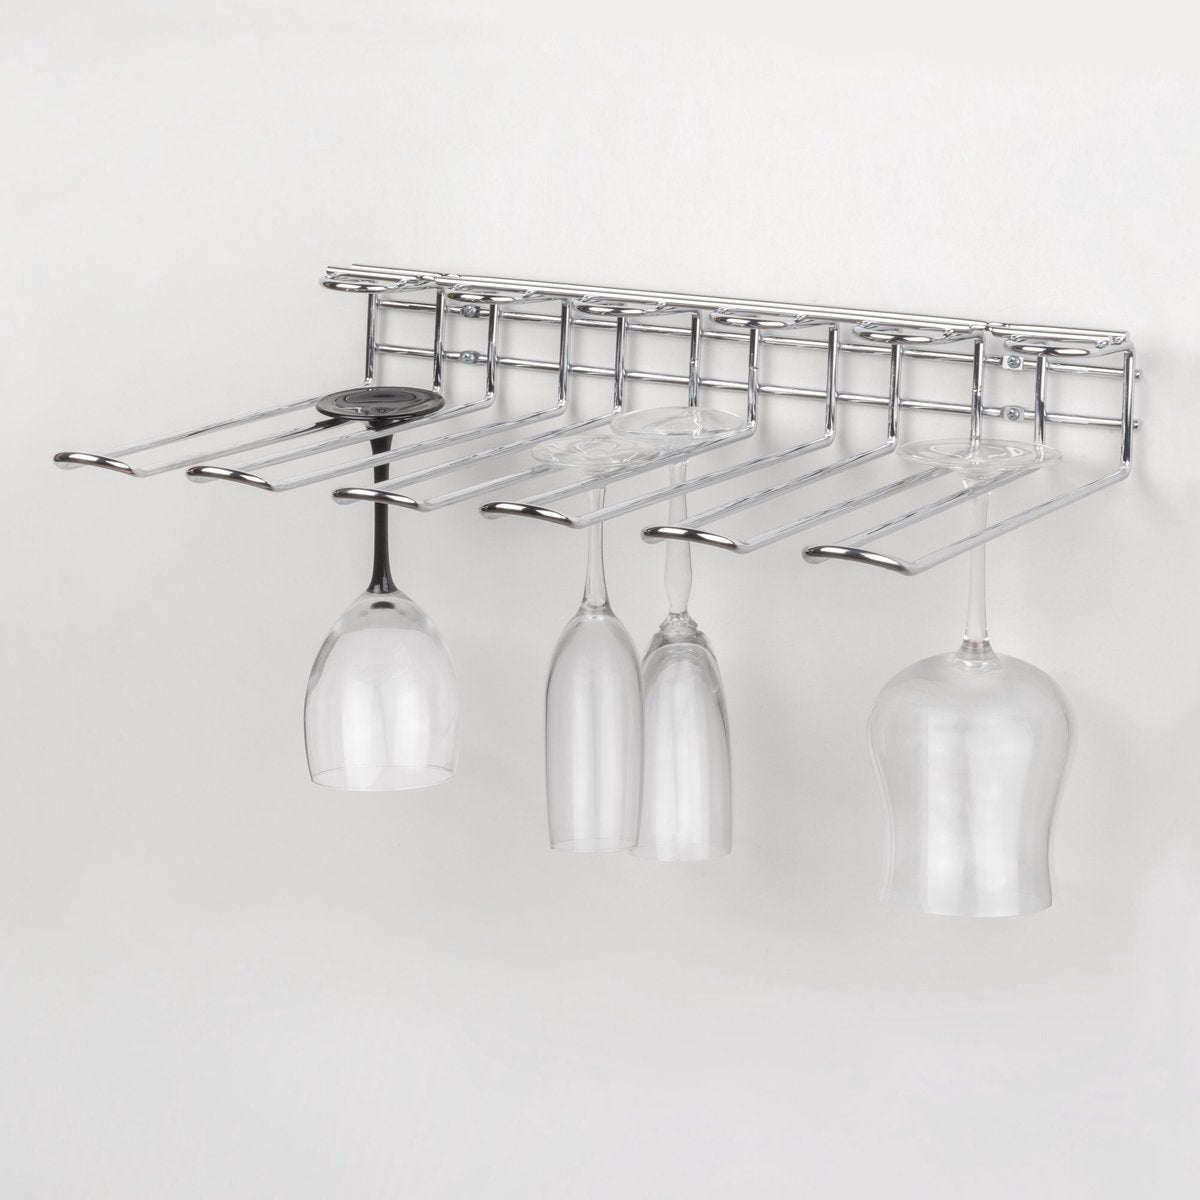 Nancy's Glass rack with 5 rows of 320 mm chrome-plated steel